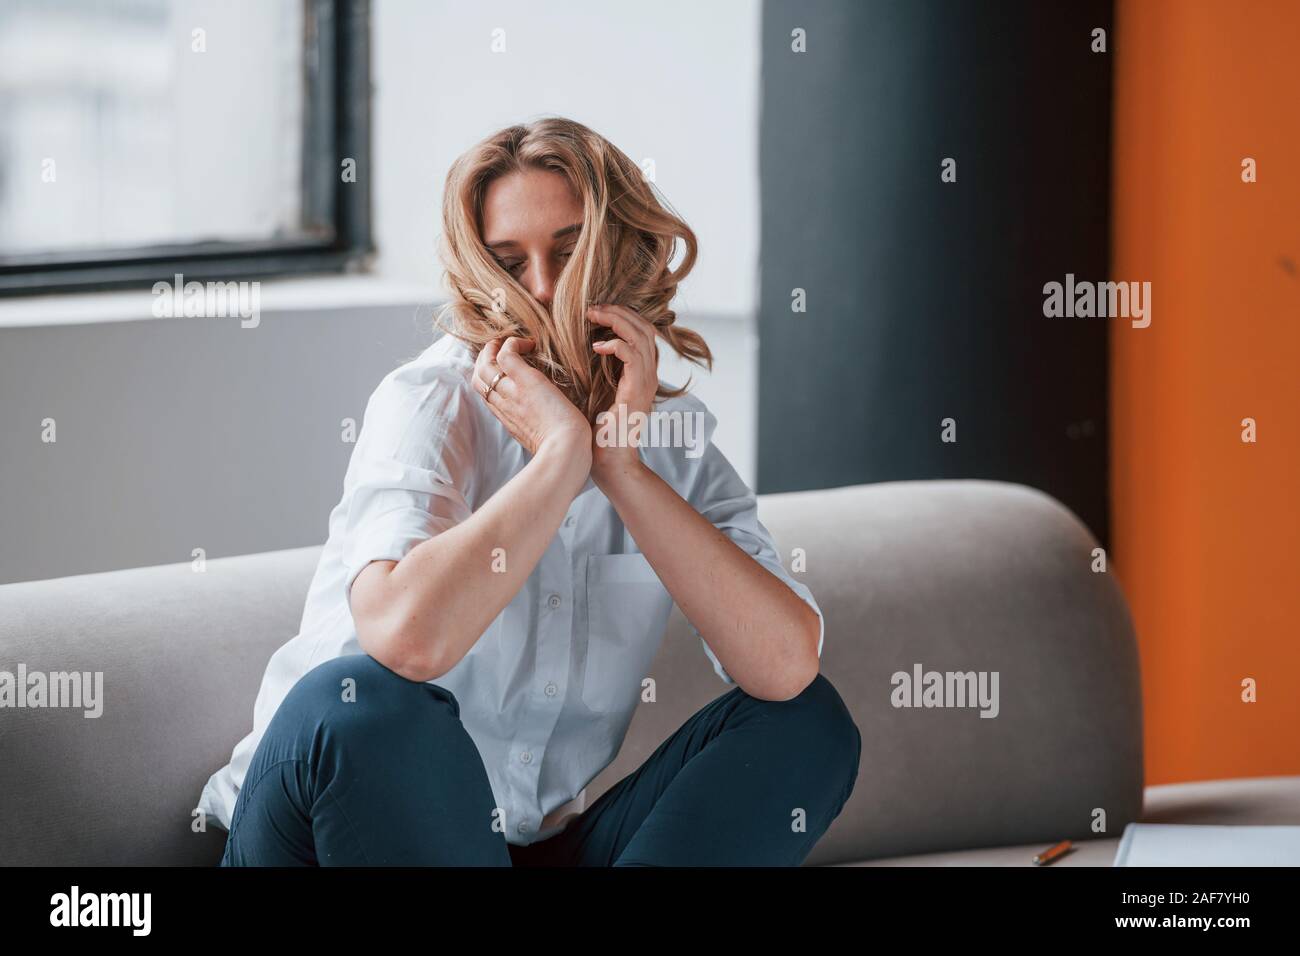 Playful mood. Businesswoman with curly blonde hair sitting in room against window Stock Photo